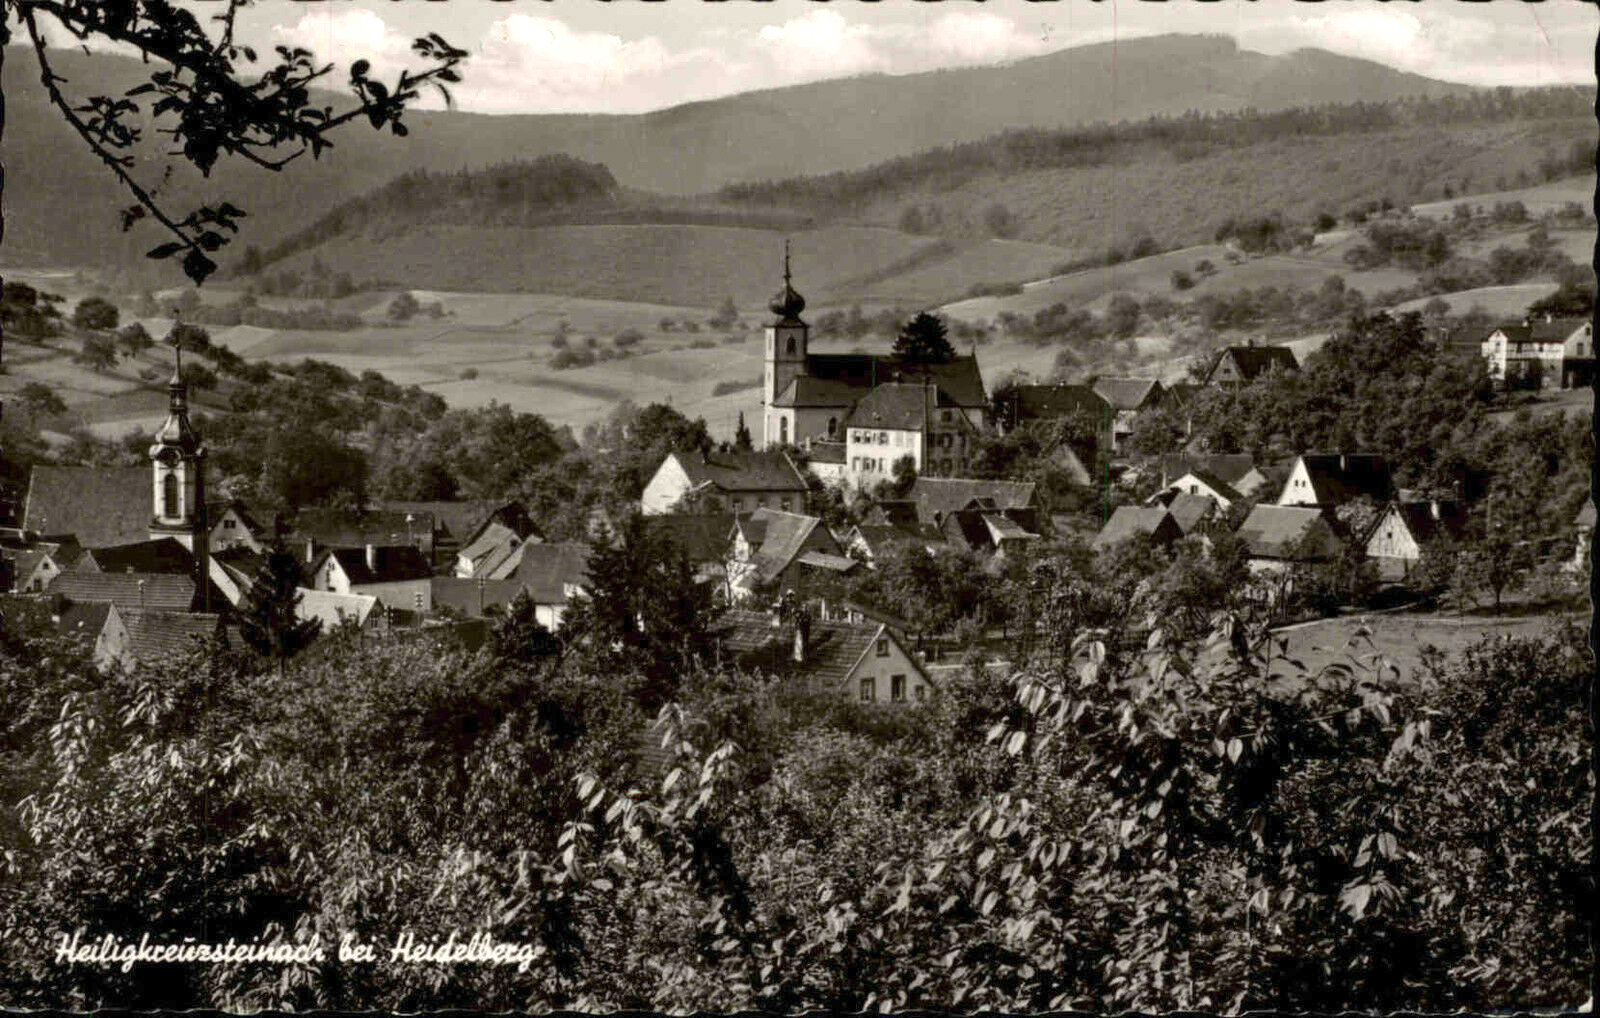 Postcard titled "Heiligkreutzsteinach bei Heidelberg". The Reformed Church in the 1760s is shown on the left side of this image.